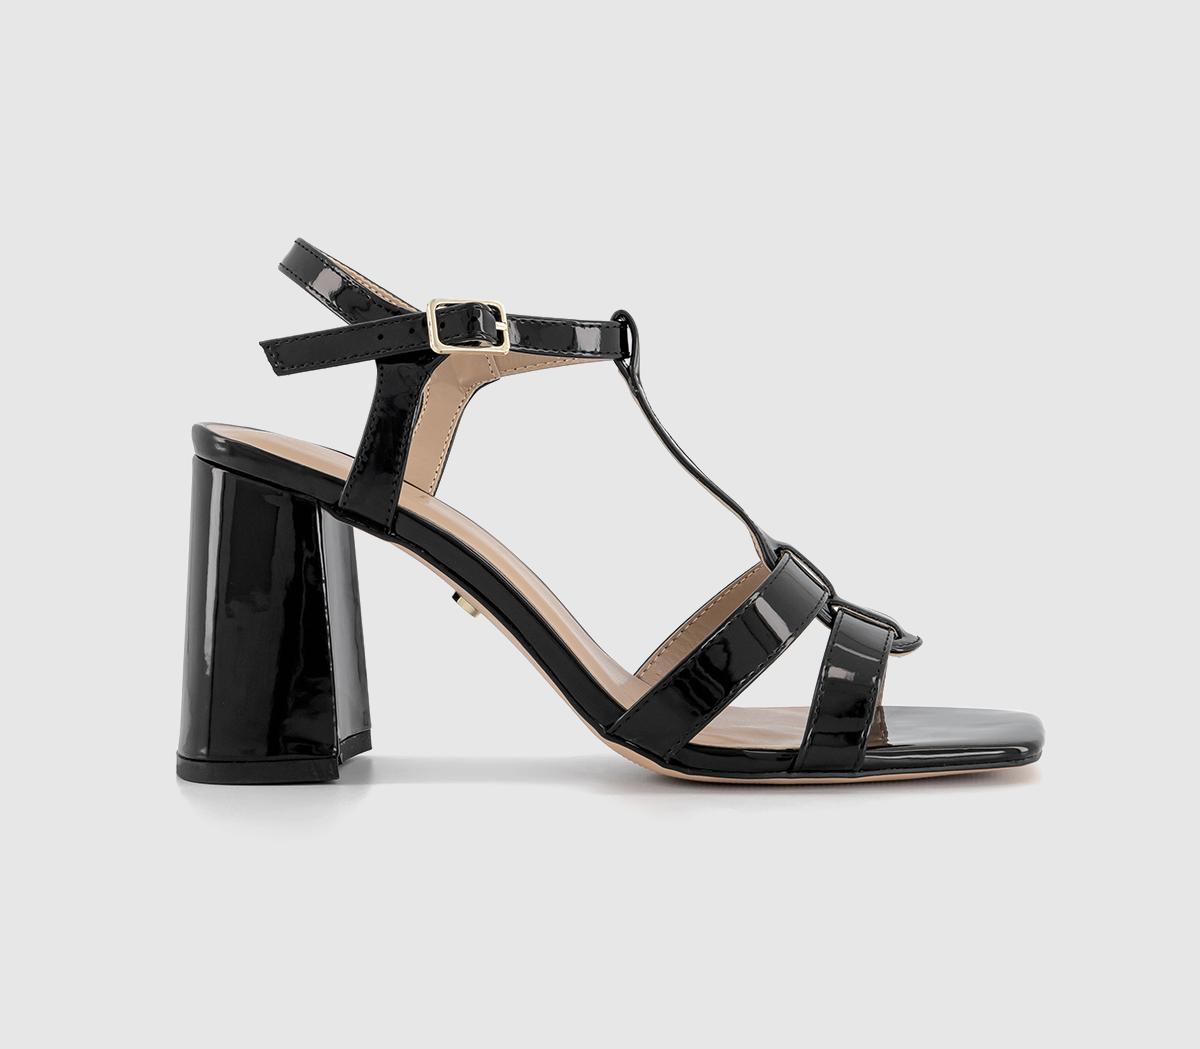 OFFICEHalo Tbar Heeled SandalsBlack Patent